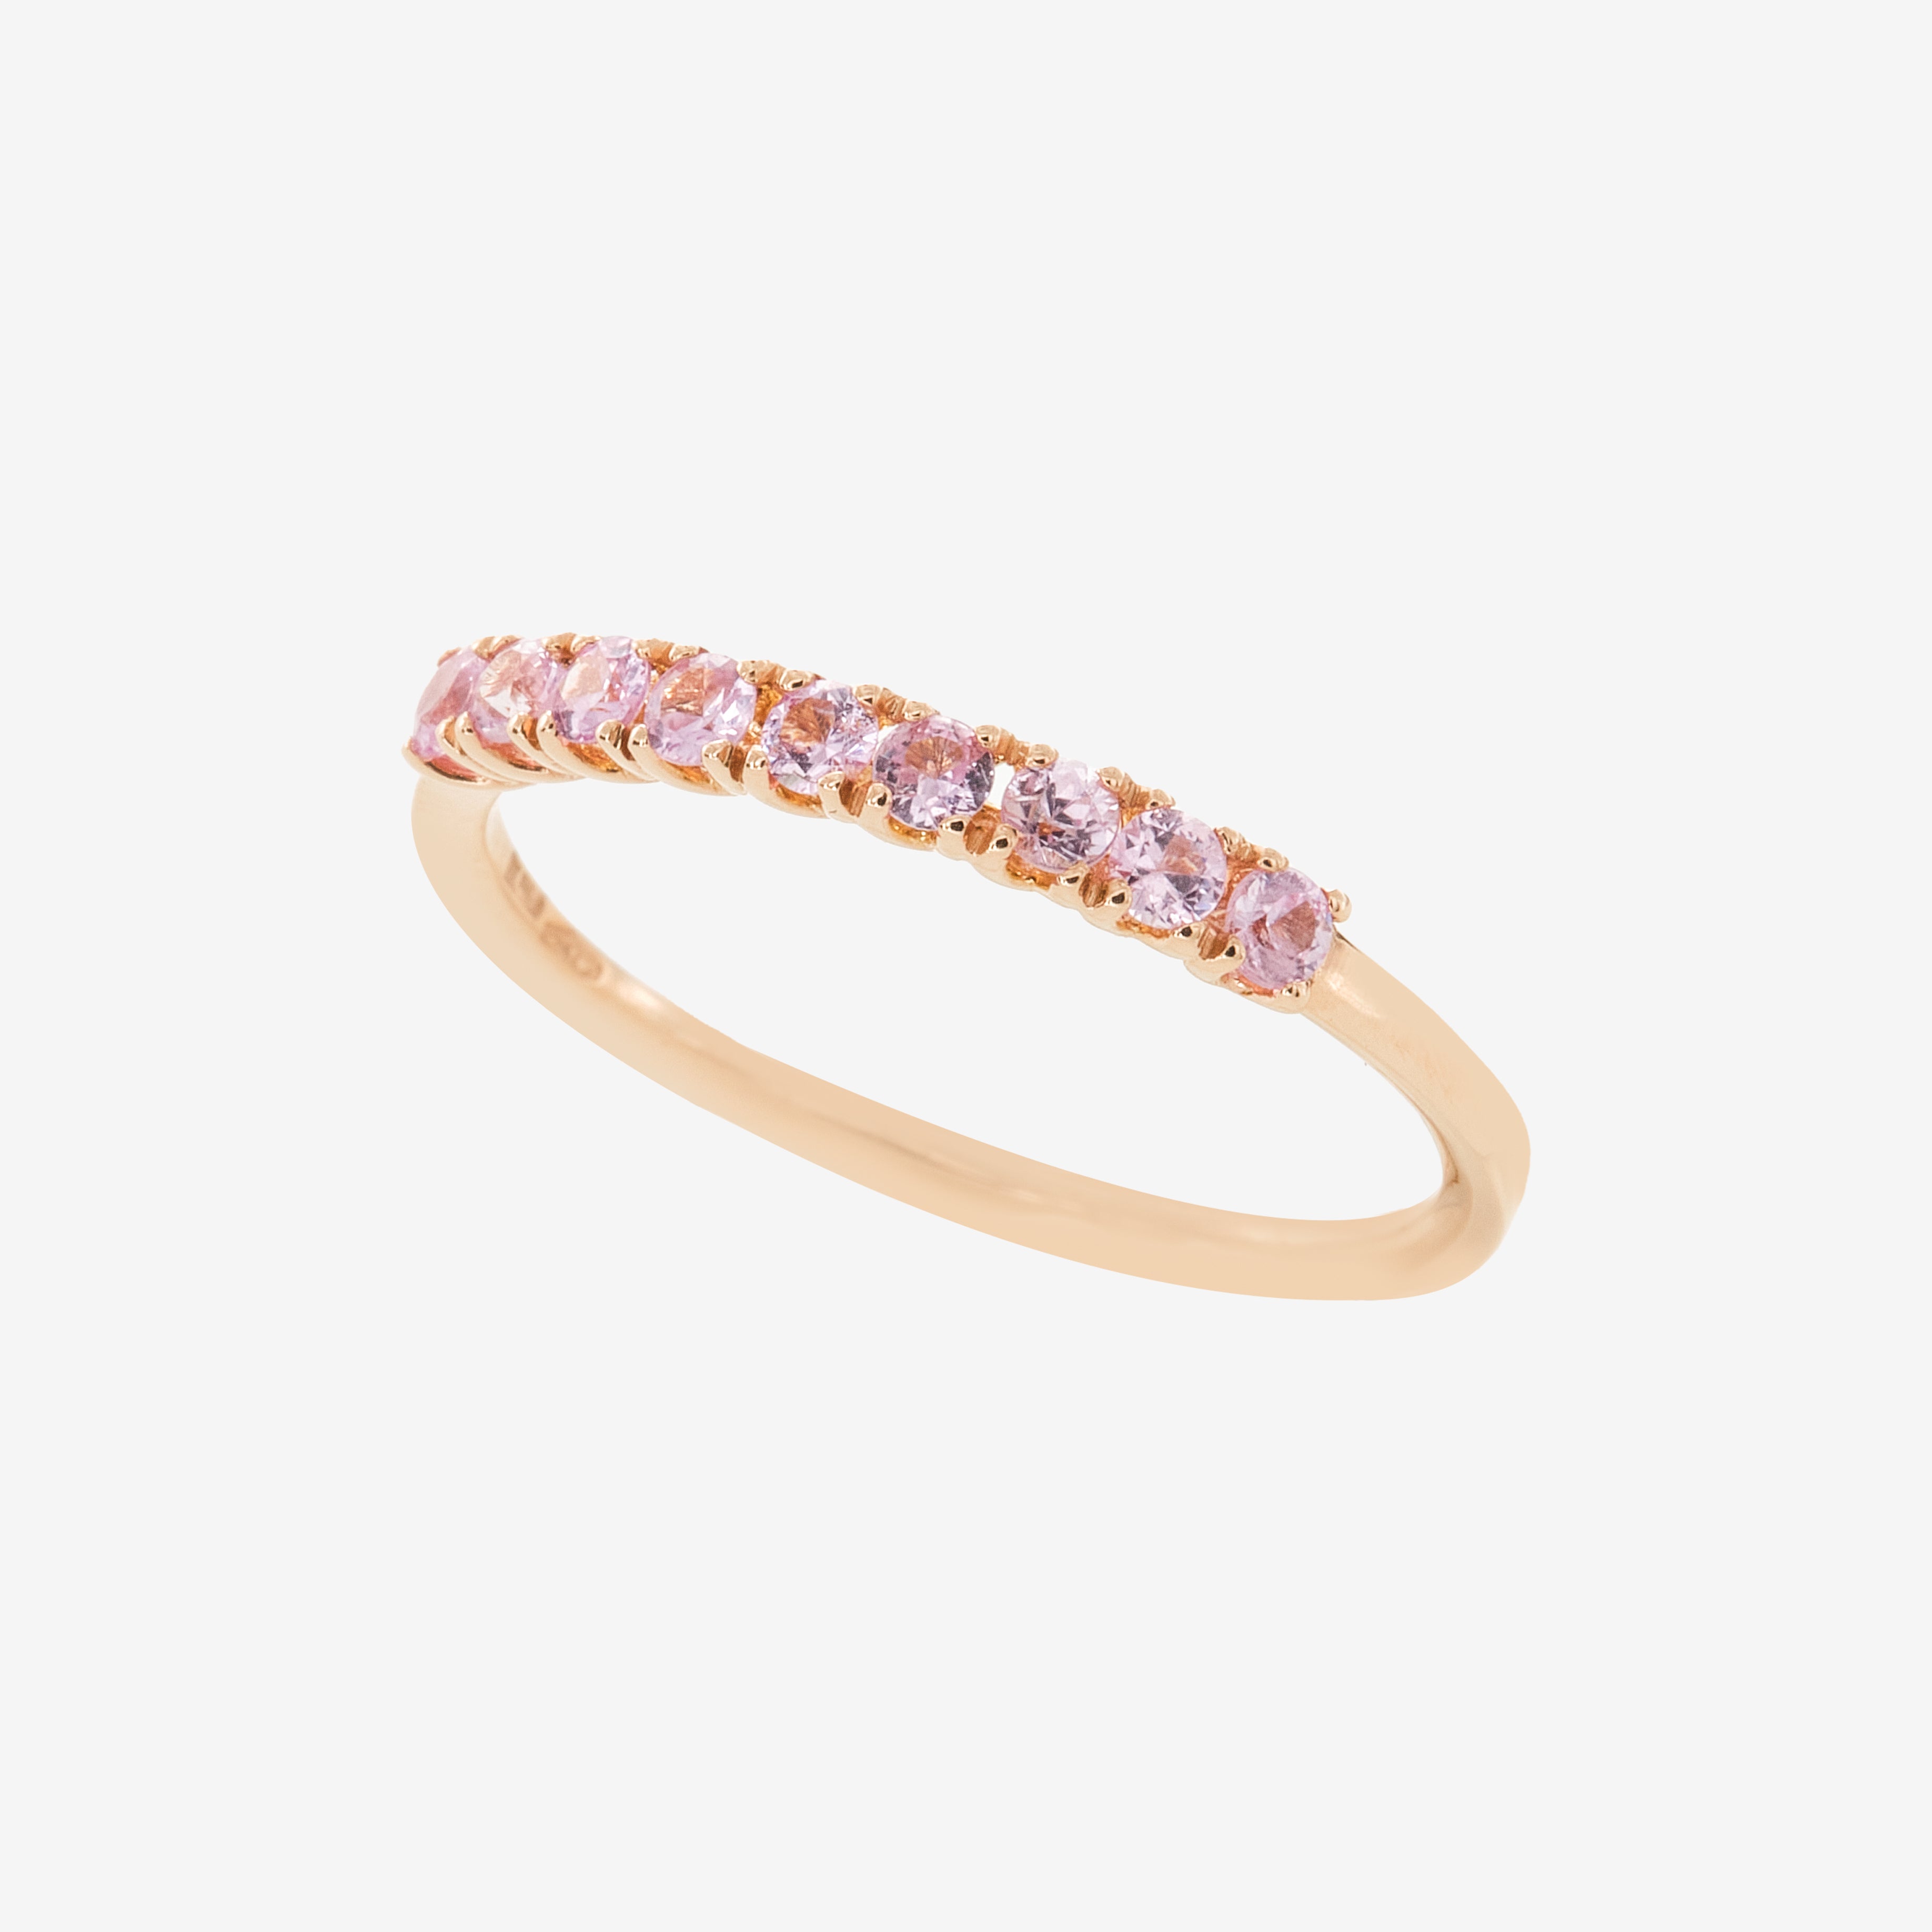 Semi-eternity ring with pink sapphires